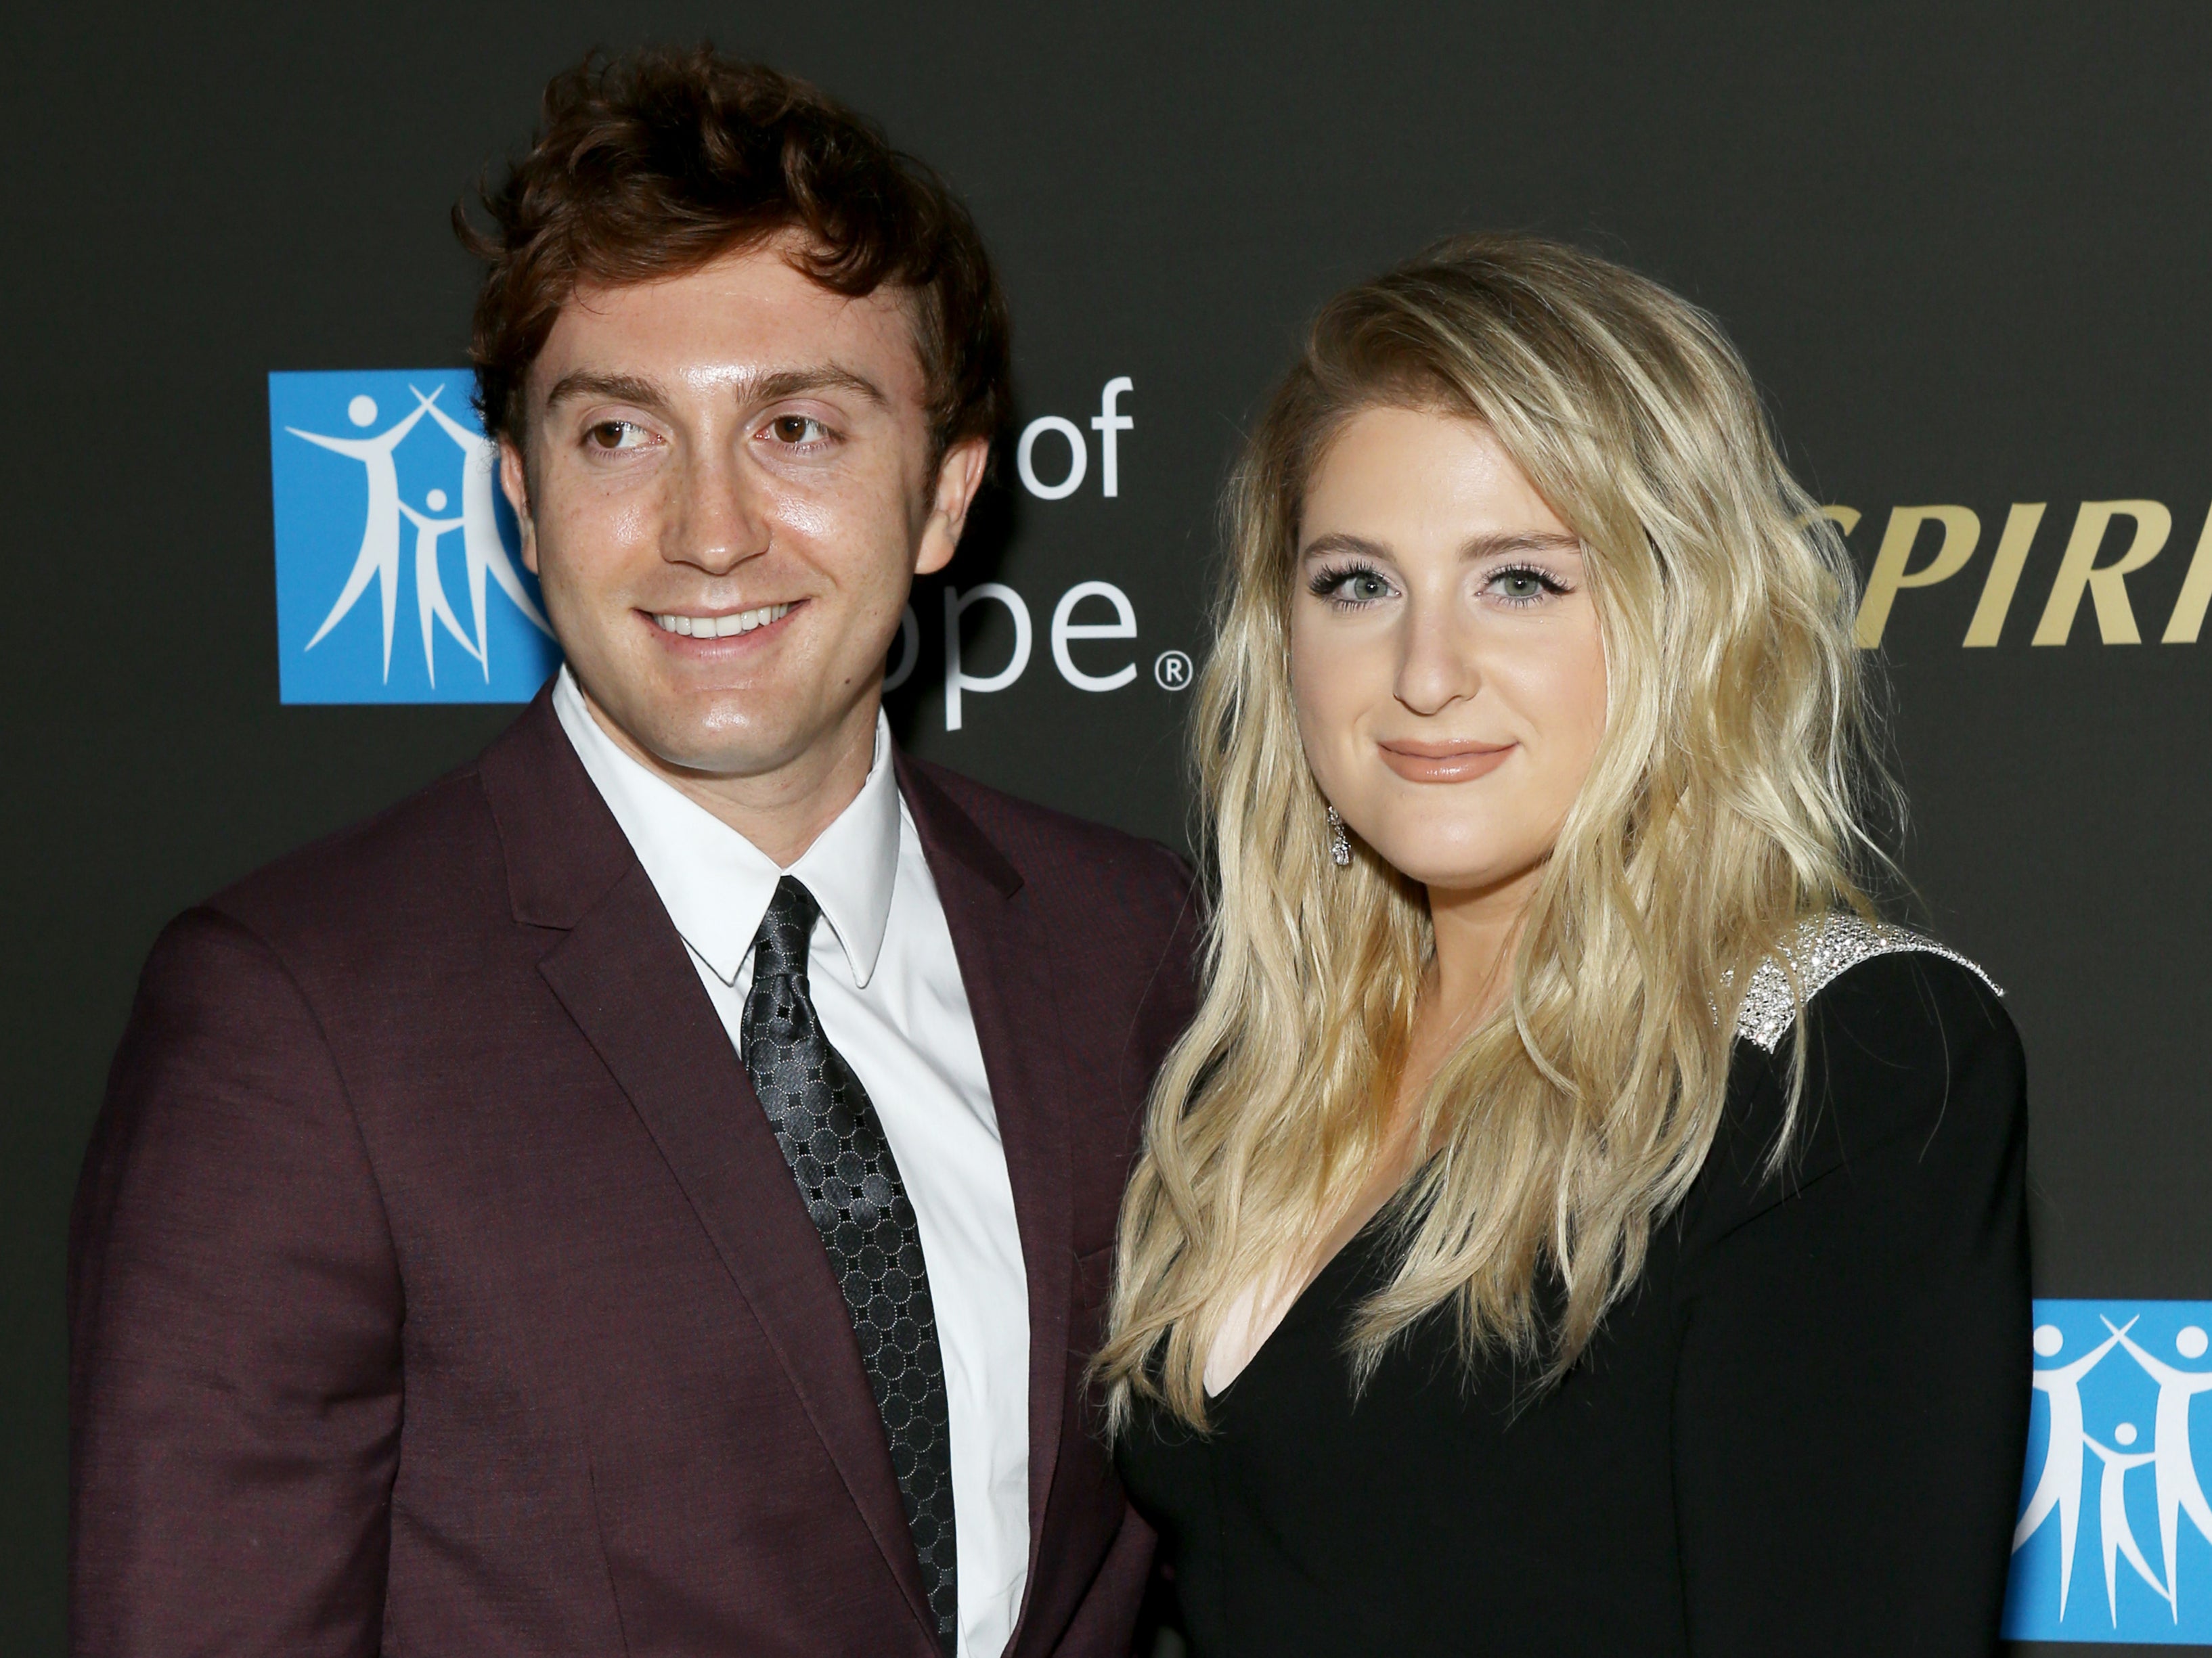 Childbirth is not an aesthetic': Meghan Trainor opens up about